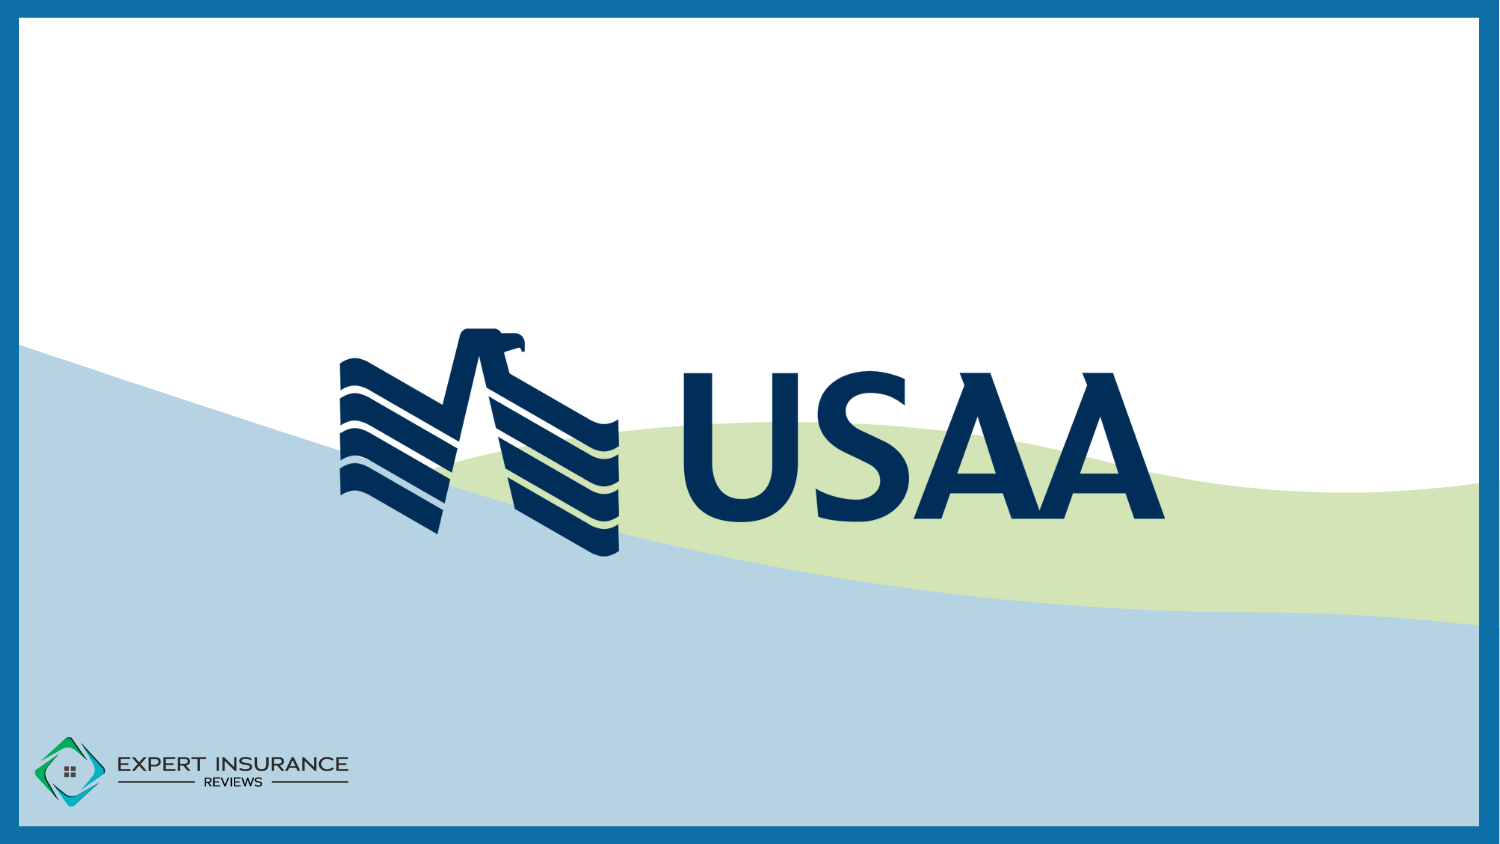 Best Acupuncturists That Accept Medicare: USAA